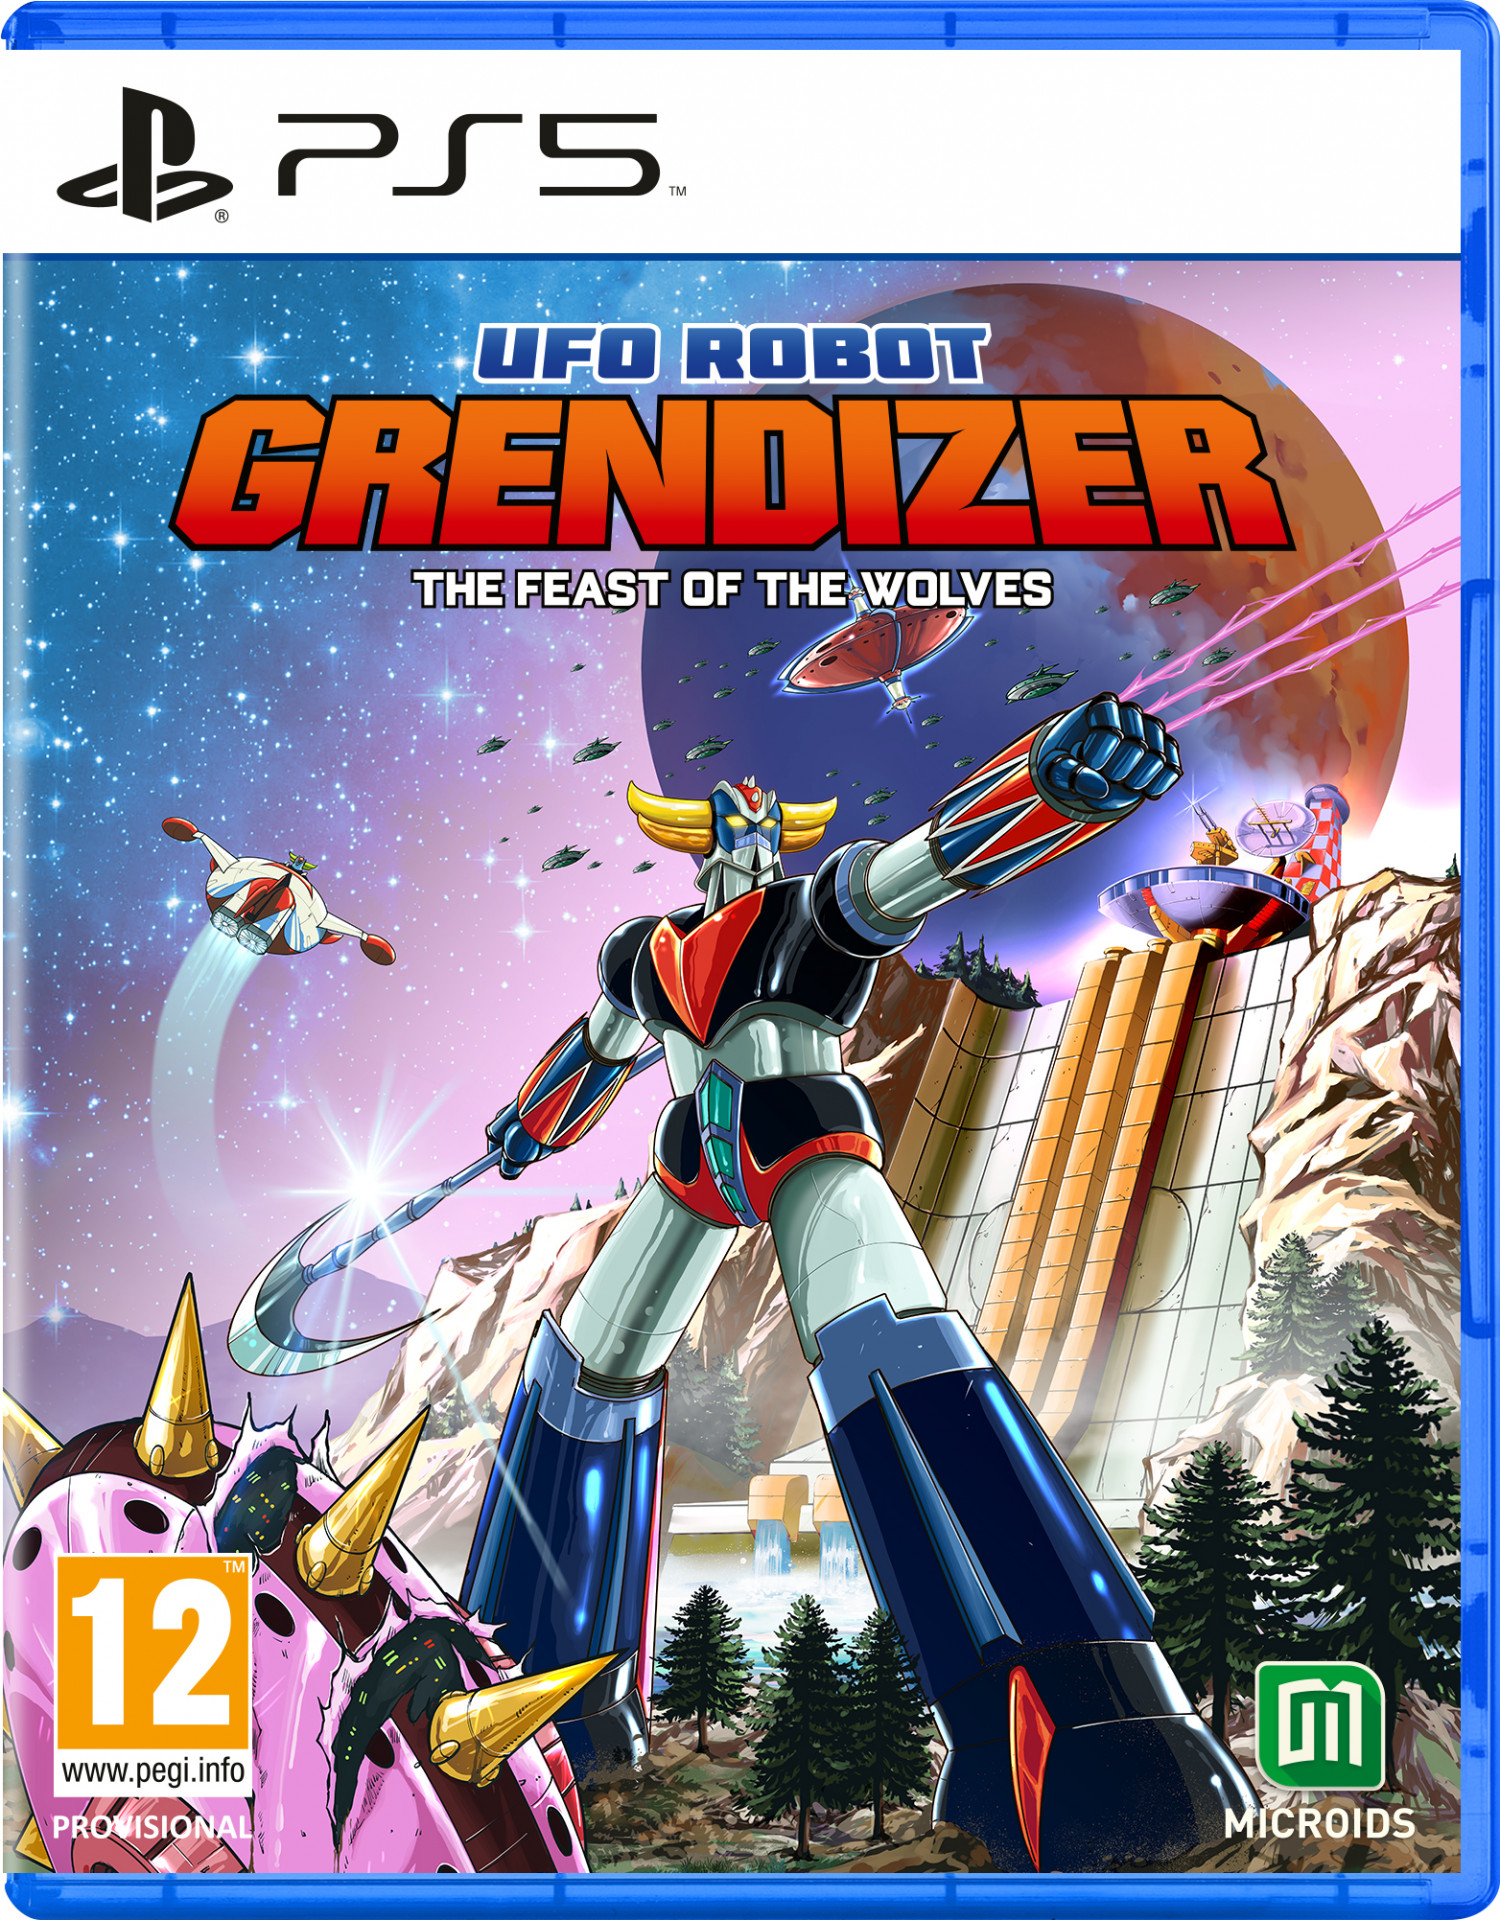 UFO Robot Grendizer: The Feast of the Wolves (PS5), Microids